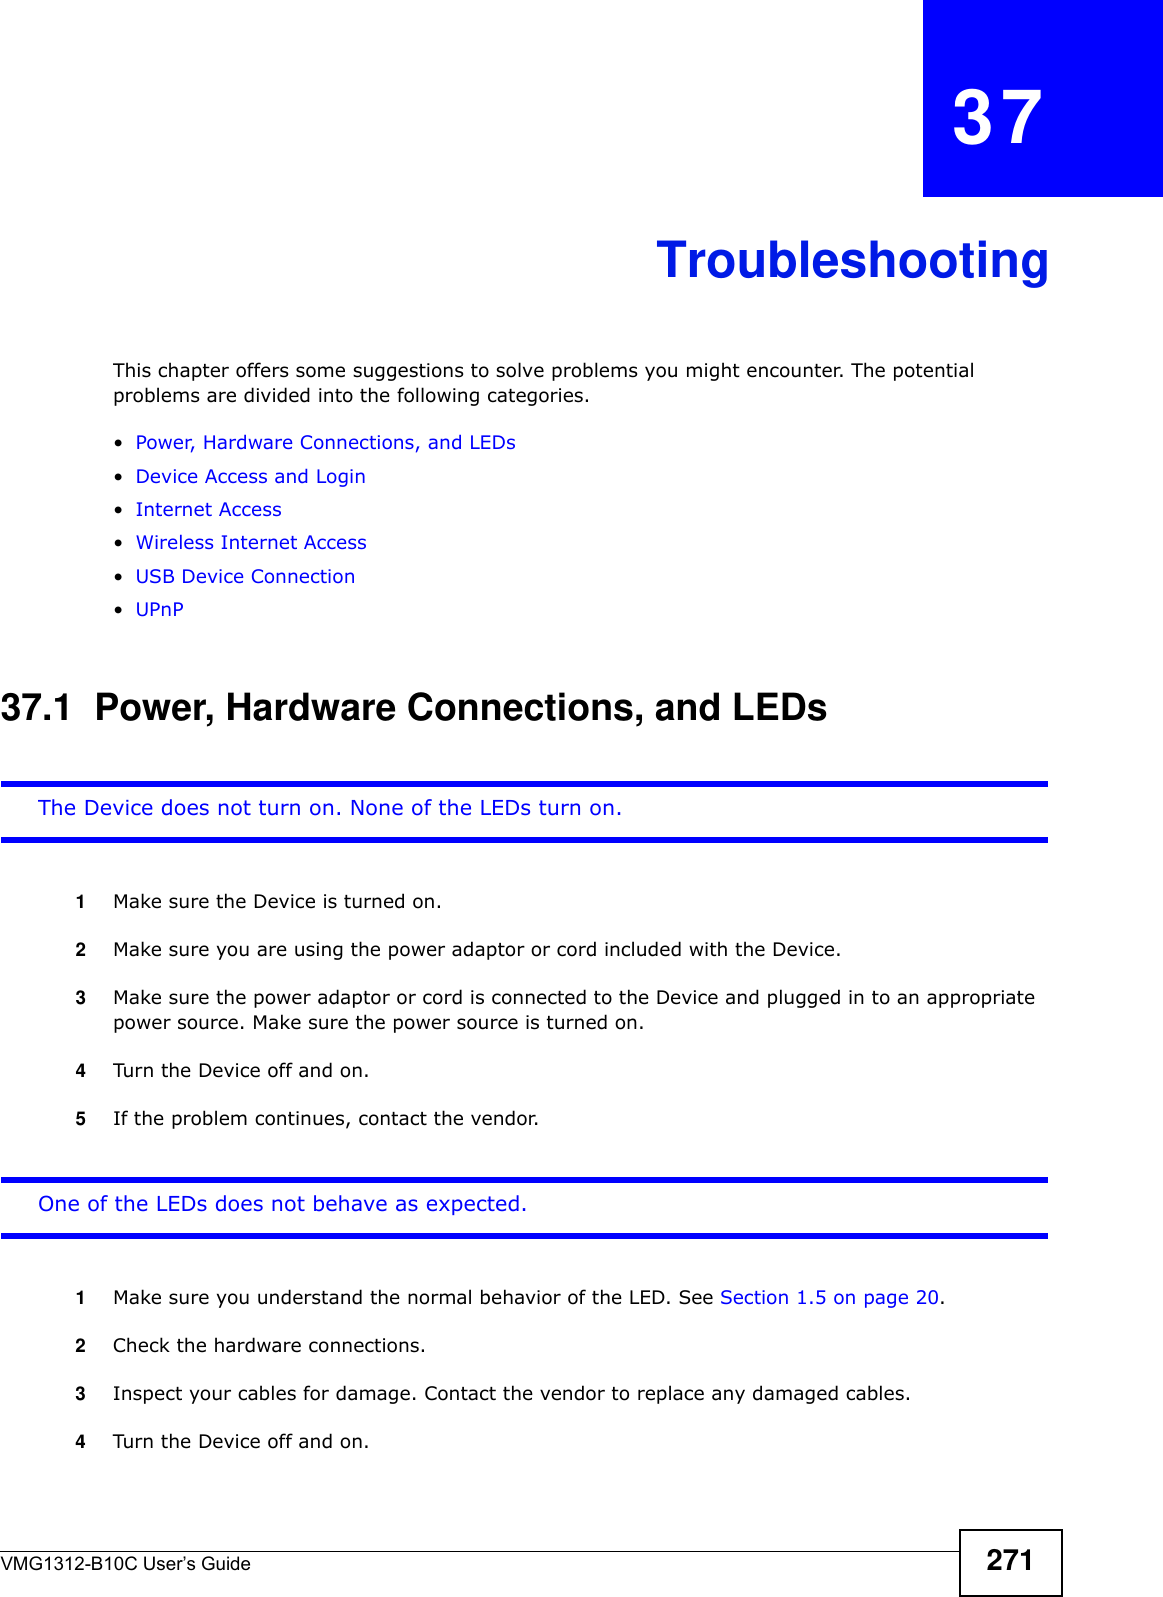 VMG1312-B10C User’s Guide 271CHAPTER   37TroubleshootingThis chapter offers some suggestions to solve problems you might encounter. The potential problems are divided into the following categories. •Power, Hardware Connections, and LEDs•Device Access and Login•Internet Access•Wireless Internet Access•USB Device Connection•UPnP37.1  Power, Hardware Connections, and LEDsThe Device does not turn on. None of the LEDs turn on.1Make sure the Device is turned on. 2Make sure you are using the power adaptor or cord included with the Device.3Make sure the power adaptor or cord is connected to the Device and plugged in to an appropriate power source. Make sure the power source is turned on.4Turn the Device off and on.5If the problem continues, contact the vendor.One of the LEDs does not behave as expected.1Make sure you understand the normal behavior of the LED. See Section 1.5 on page 20.2Check the hardware connections.3Inspect your cables for damage. Contact the vendor to replace any damaged cables.4Turn the Device off and on.